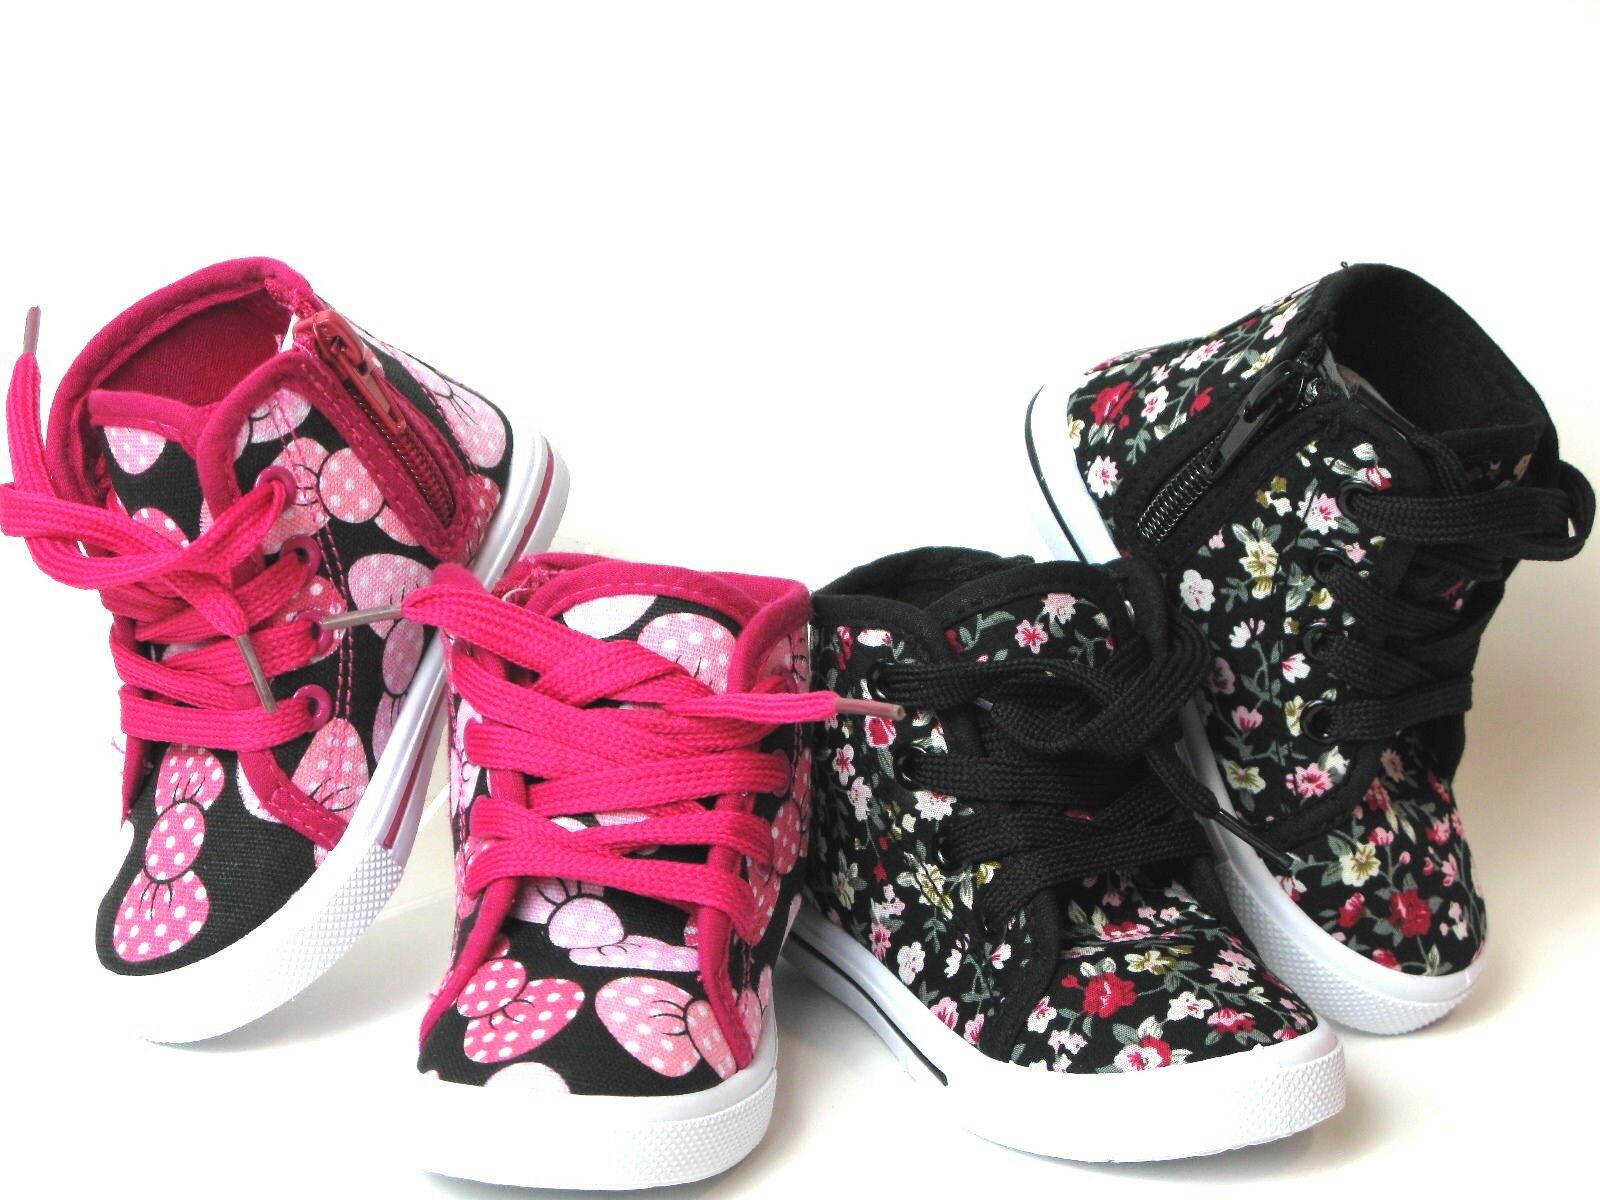 New  Baby Toddler Girls Canvas High Top Lace Up Shoes  Inside Zipper Sz 4-9